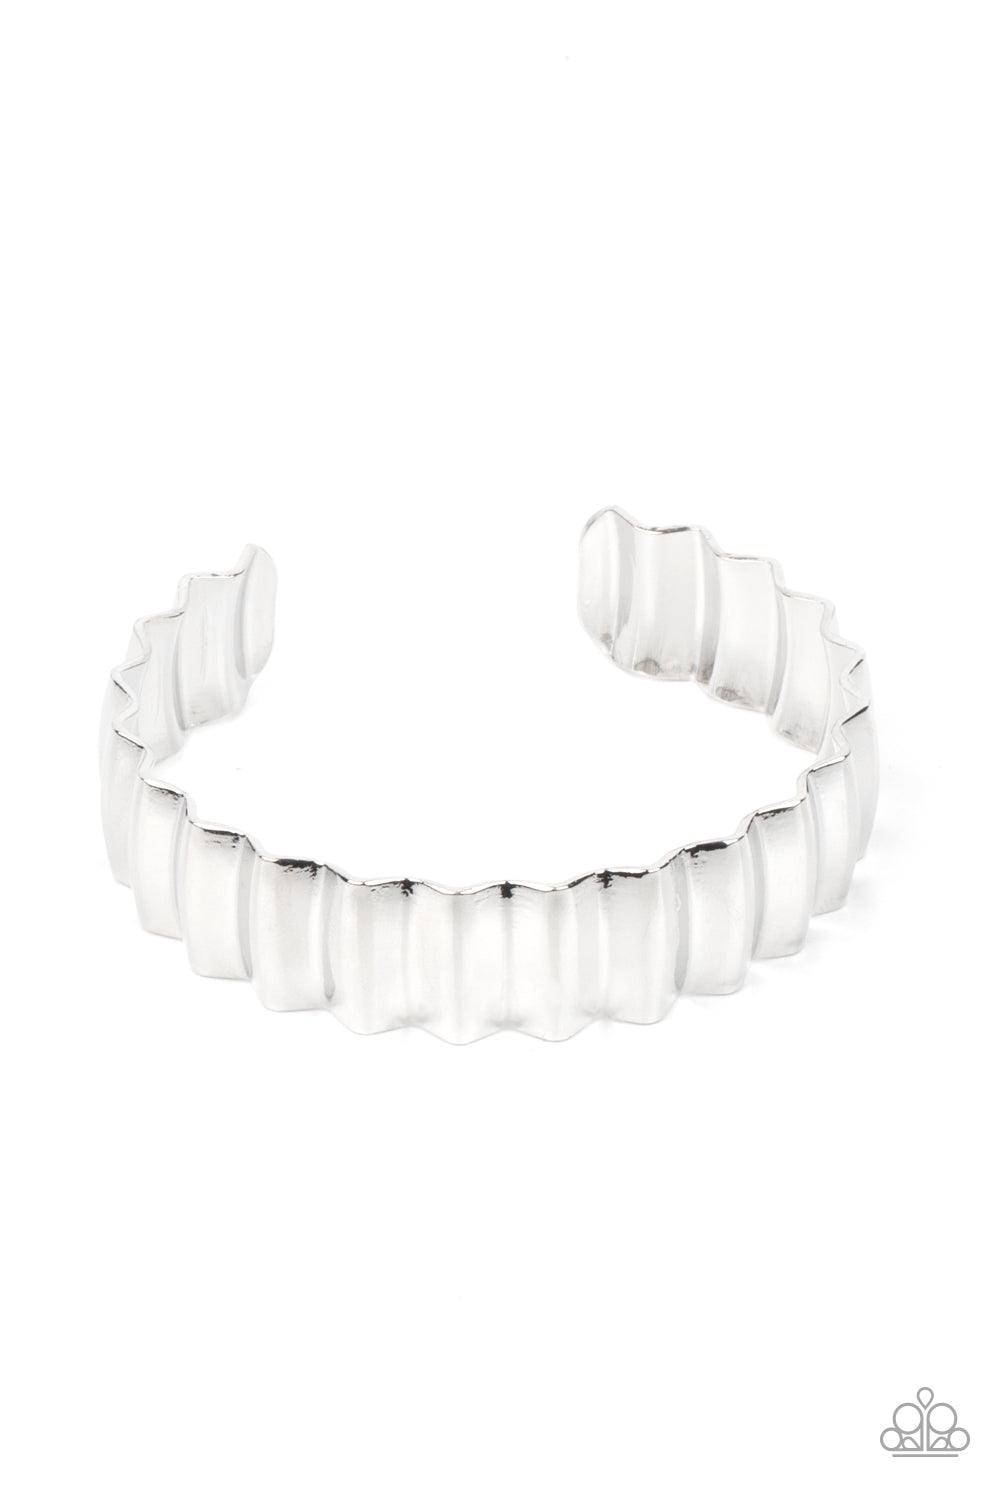 Paparazzi Accessories Across The HEIR-Waves - Silver Polished in a high sheen finish, a crinkled silver cuff delicately curls around the wrist for an intense industrial look. Sold as one individual bracelet. Bracelets